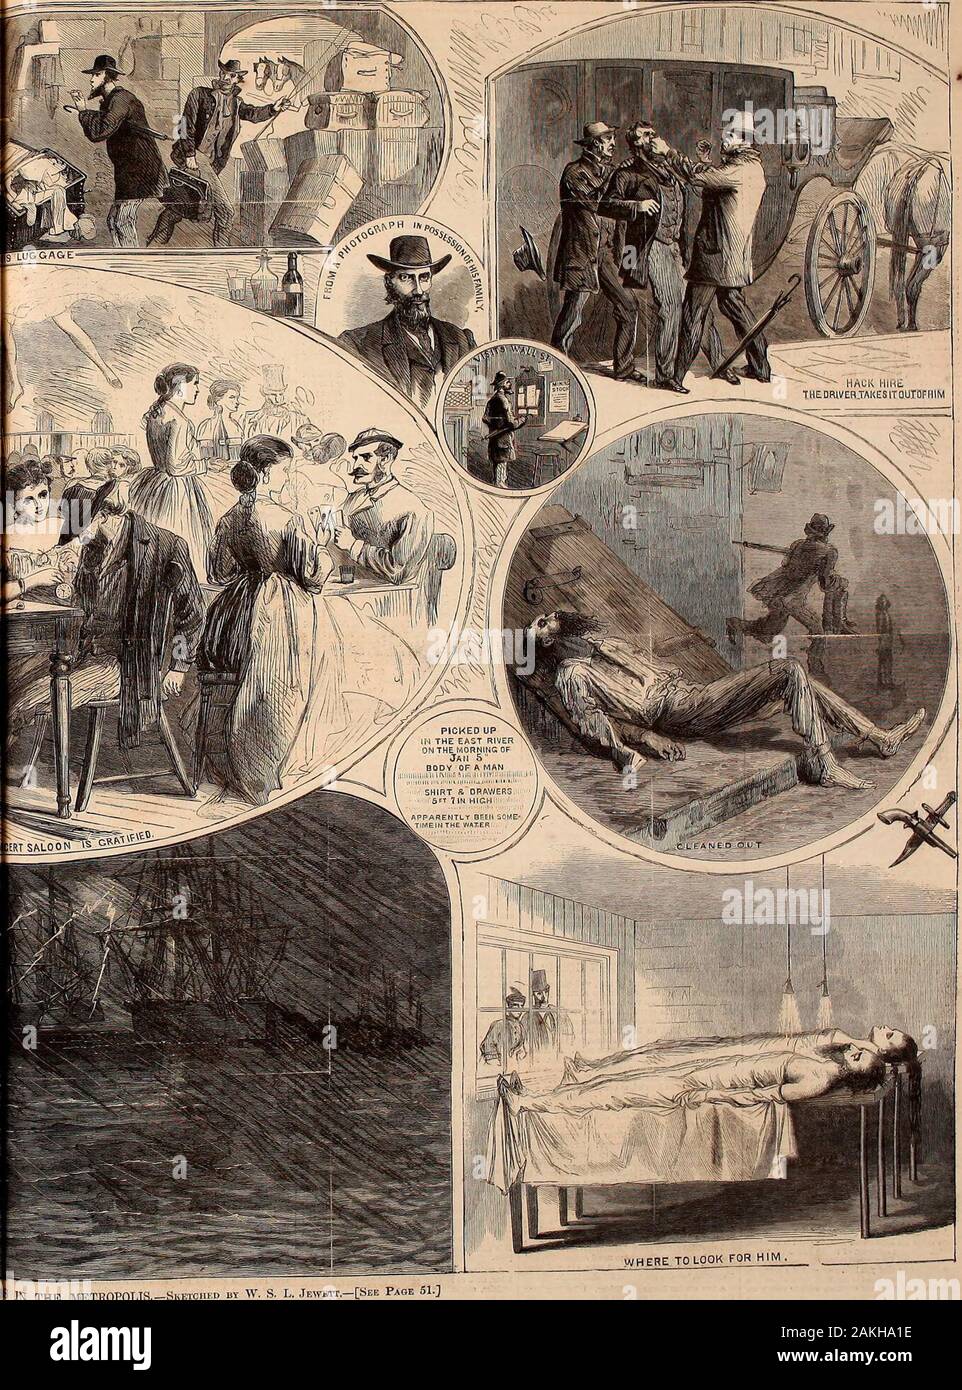 Harper's weekly . THE ADVENTURES OF A MISSING MANs 01!, TWEXTY-EOUR HOI. INT THE METROPOLTS.- cnED ux W. S. L. Jewett—[See Page 51.] riAi;ii:j;s wf.f.u.y. [January 26, 1867. THE COQUETTE OF AELON. ;?;,;:,: In Ihc projected comedy, he rflic coquette, finding him bo ? ?nr-Hy, UUrJjr had takei e apparition held a lighted ,.- lucky lbi.1 il «:r, ..f hlu] .V.nc..r ? il i-lli/ht c.Hi.L-ti ii&lt;iw g( up Id MViiCir-I li.- mr-c/c.I twice. N.il In-ill^ :iUle to I lii.n.iru. .-:ir&gt;. CBlasdlslill^ll^he.ll.ii.^.-lfiin.l.T th-.e trvih_- n 1 ^i*.-J I ;, n I ) 11DMK ,M&gt; rni;j;i,; , ?vhich she ventur Stock Photo